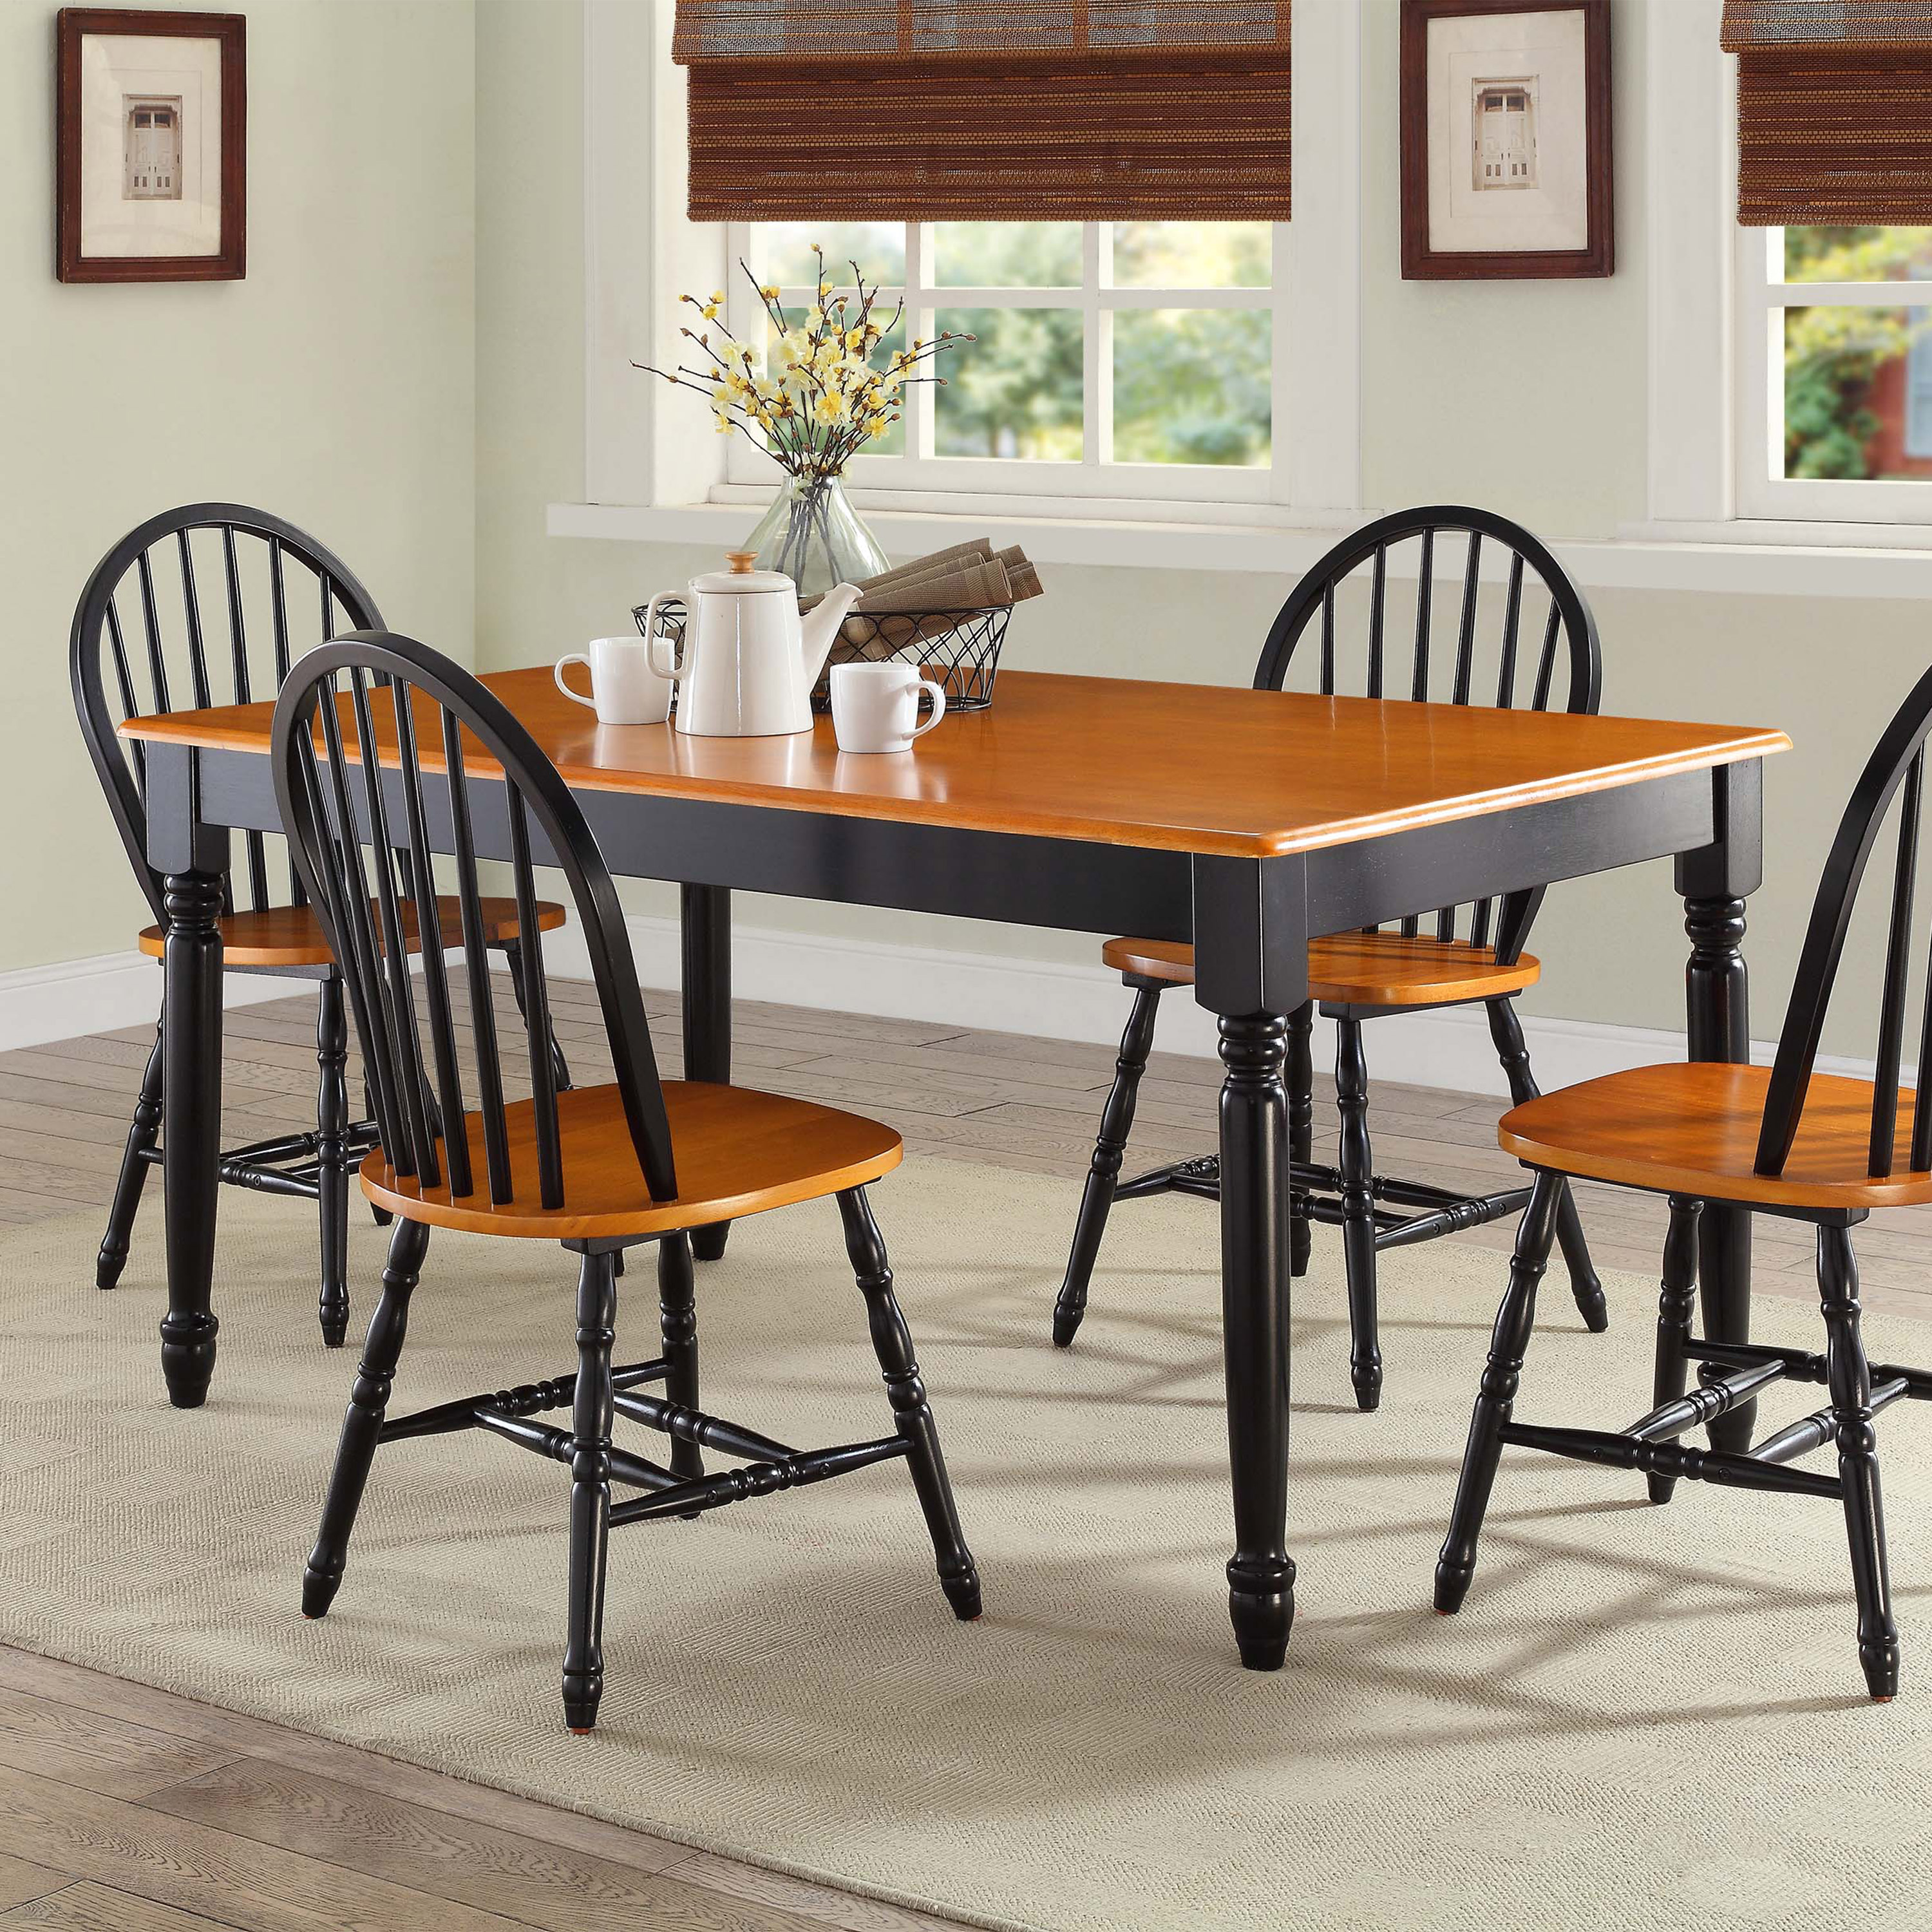 Better Homes and Gardens Autumn Lane Farmhouse 6-Piece Dining Set Bundle, Black and Oak - image 2 of 4